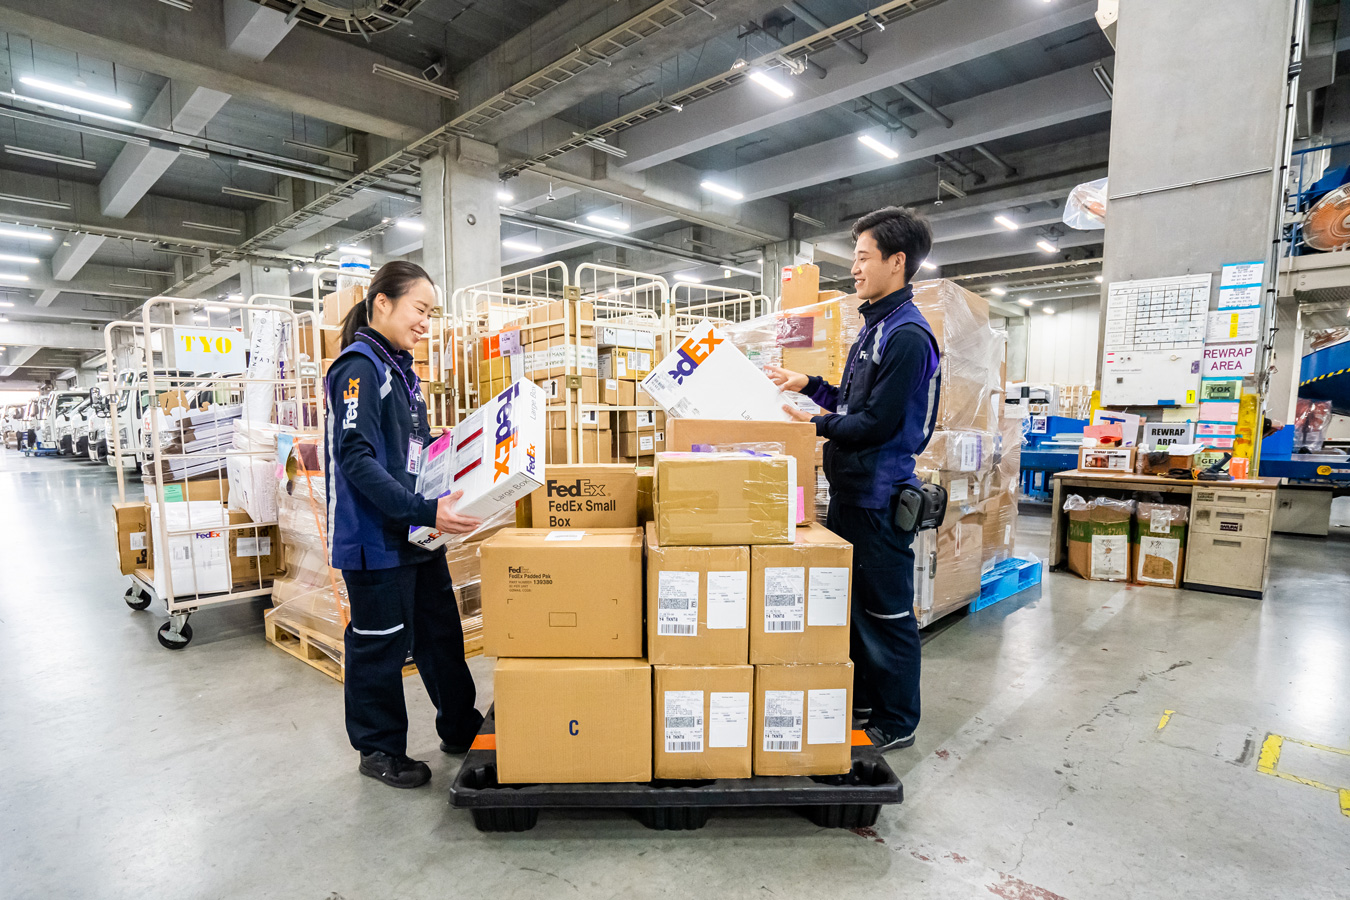 Male and female worker in FedEx uniform stack packages on trolley